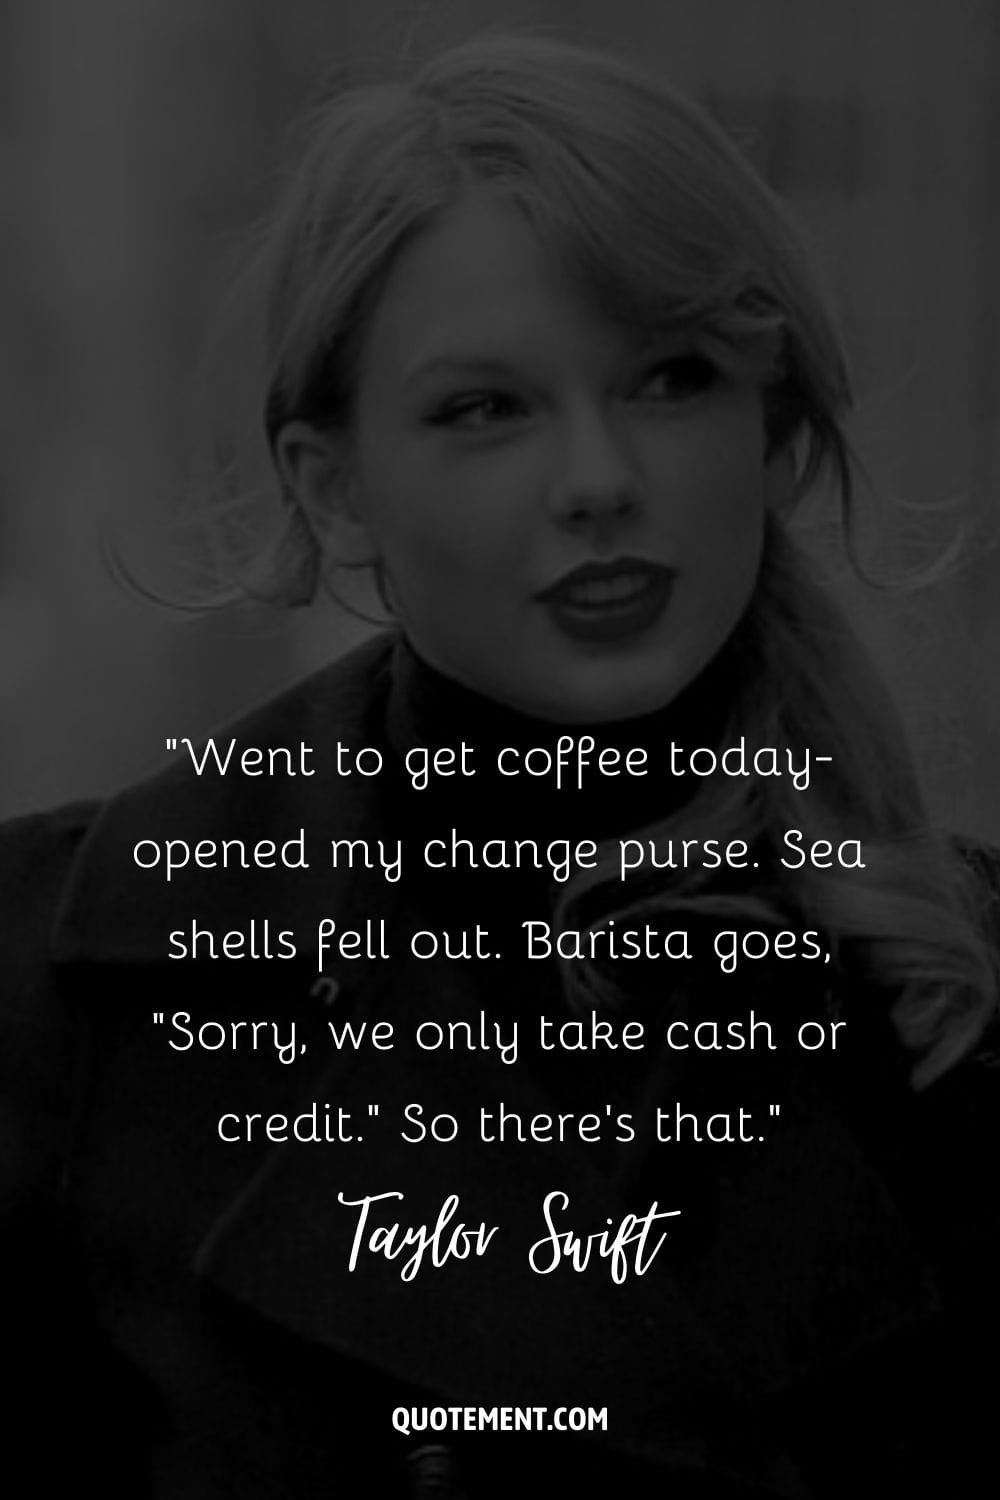 “Went to get coffee today-opened my change purse. Sea shells fell out. Barista goes, Sorry, we only take cash or credit. So there's that.” ― Taylor Swift